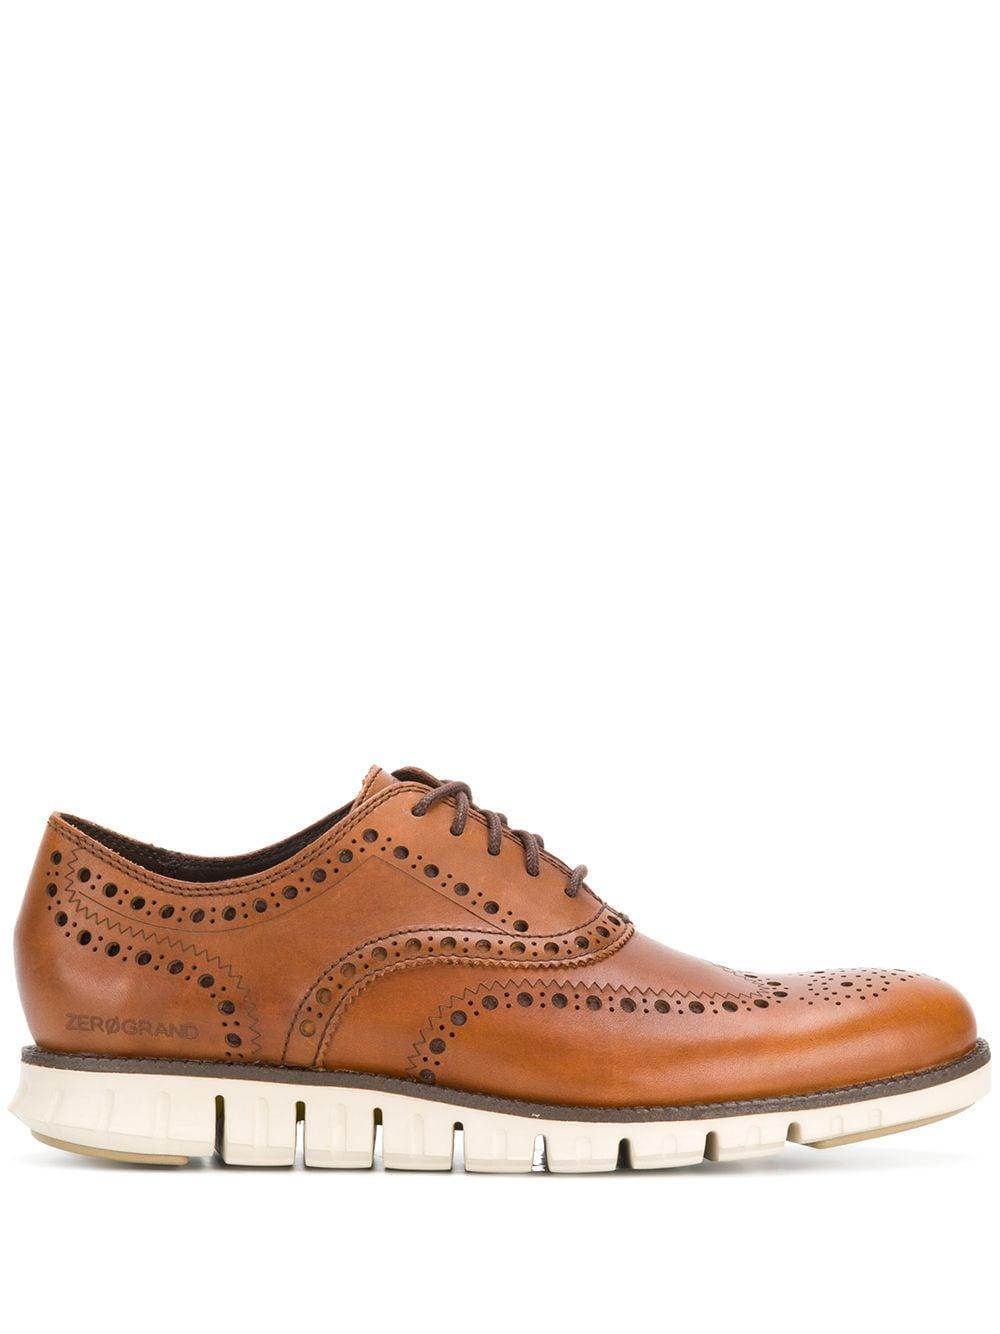 Cole Haan Leather Ridged Sole Oxford Shoes in Brown for Men - Lyst